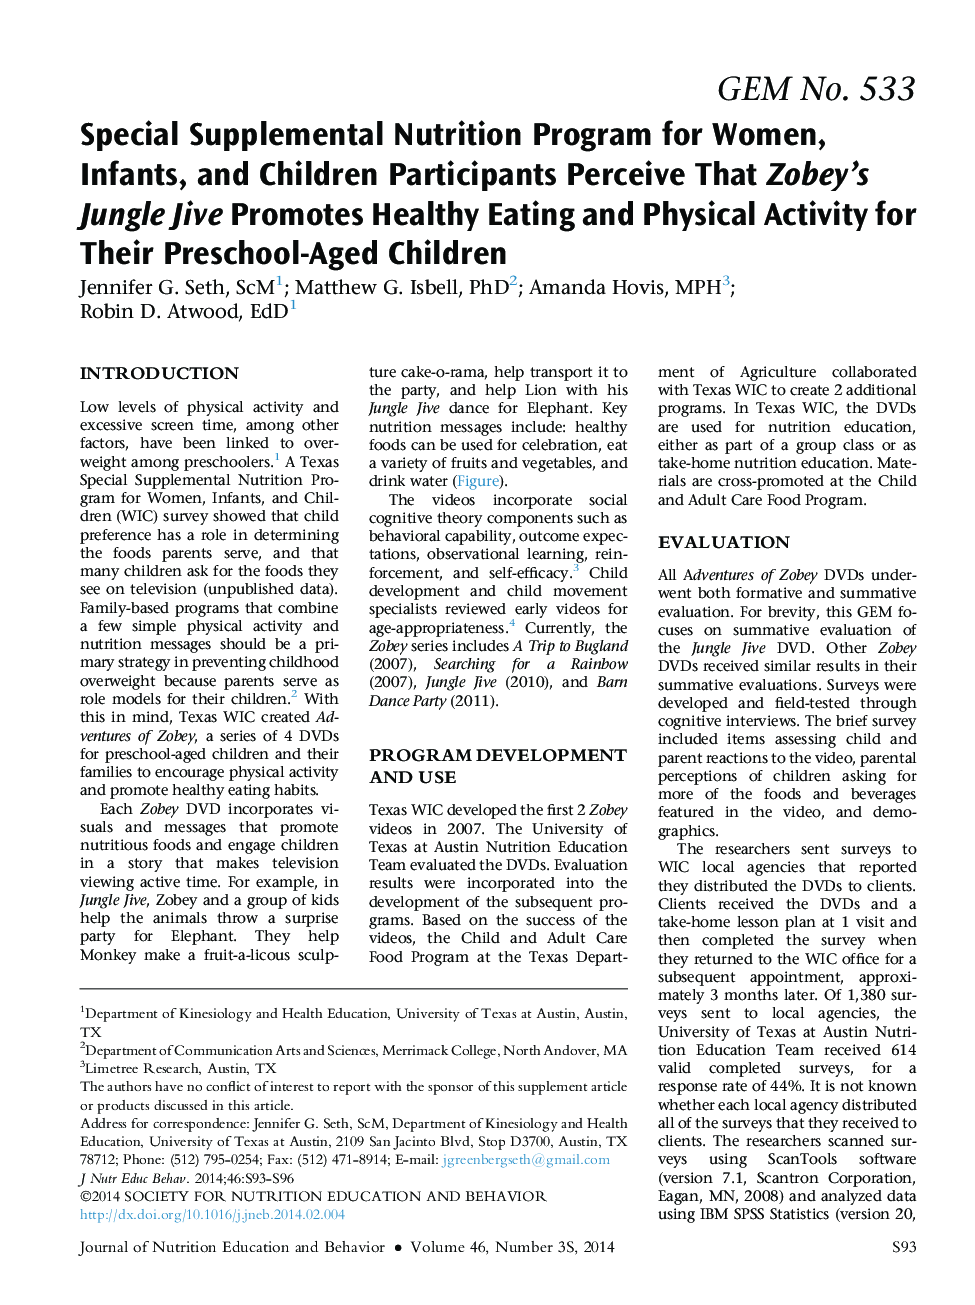 Special Supplemental Nutrition Program for Women, Infants, and Children Participants Perceive That Zobey's Jungle Jive Promotes Healthy Eating and Physical Activity for Their Preschool-Aged Children